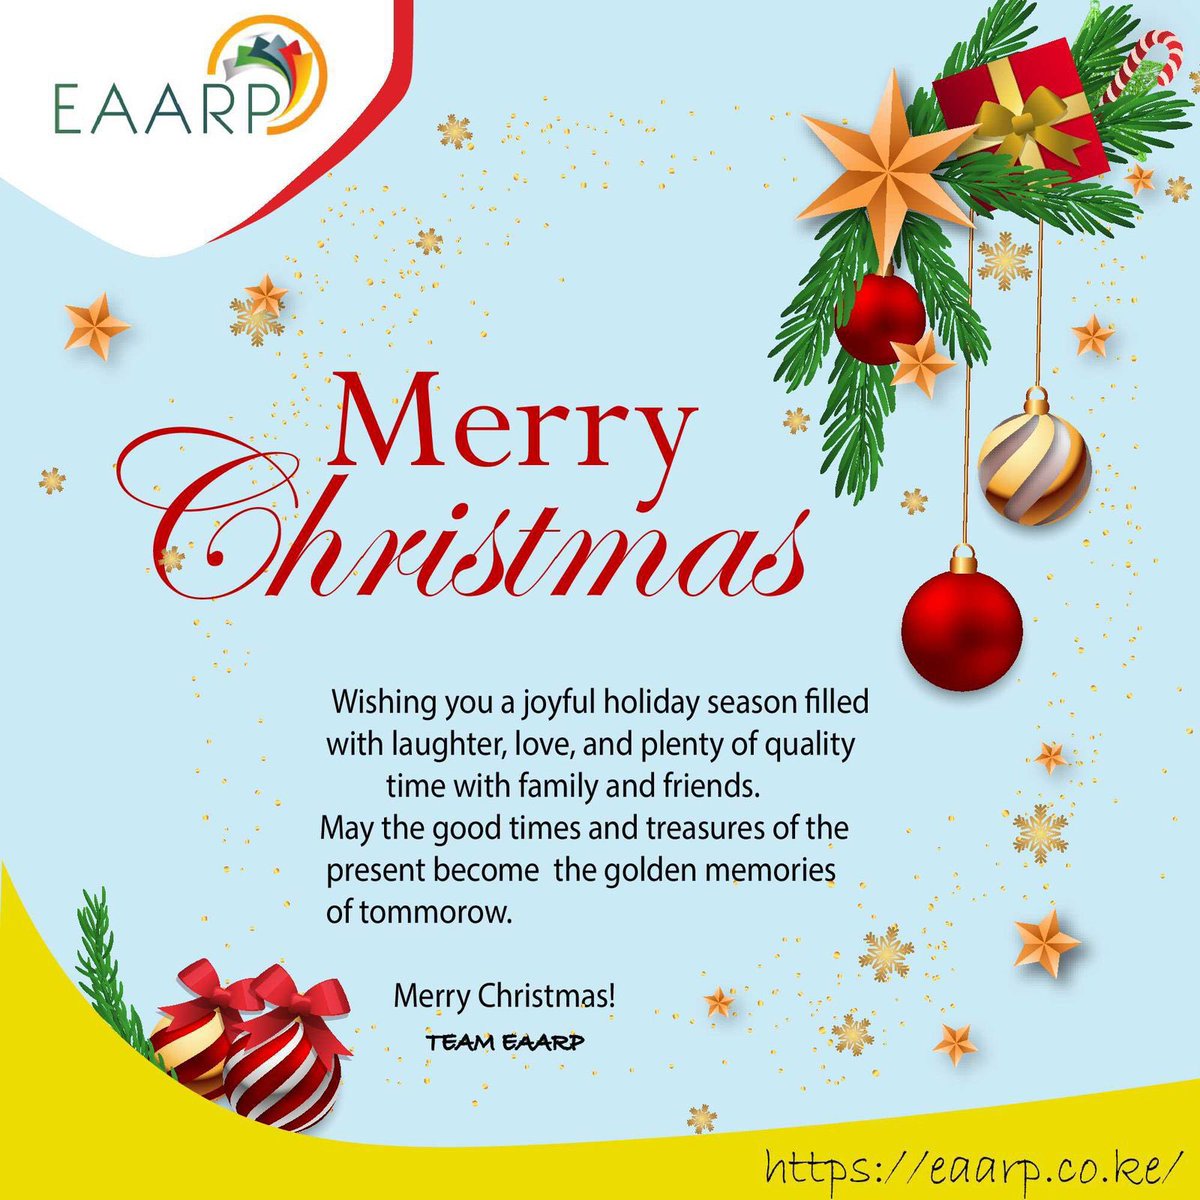 Merry Christmas from EAARP! Wishing you a joyful holiday season filled with love, laughter, and cherished moments. Have a good one! #MerryChristmas #HappyHolidays